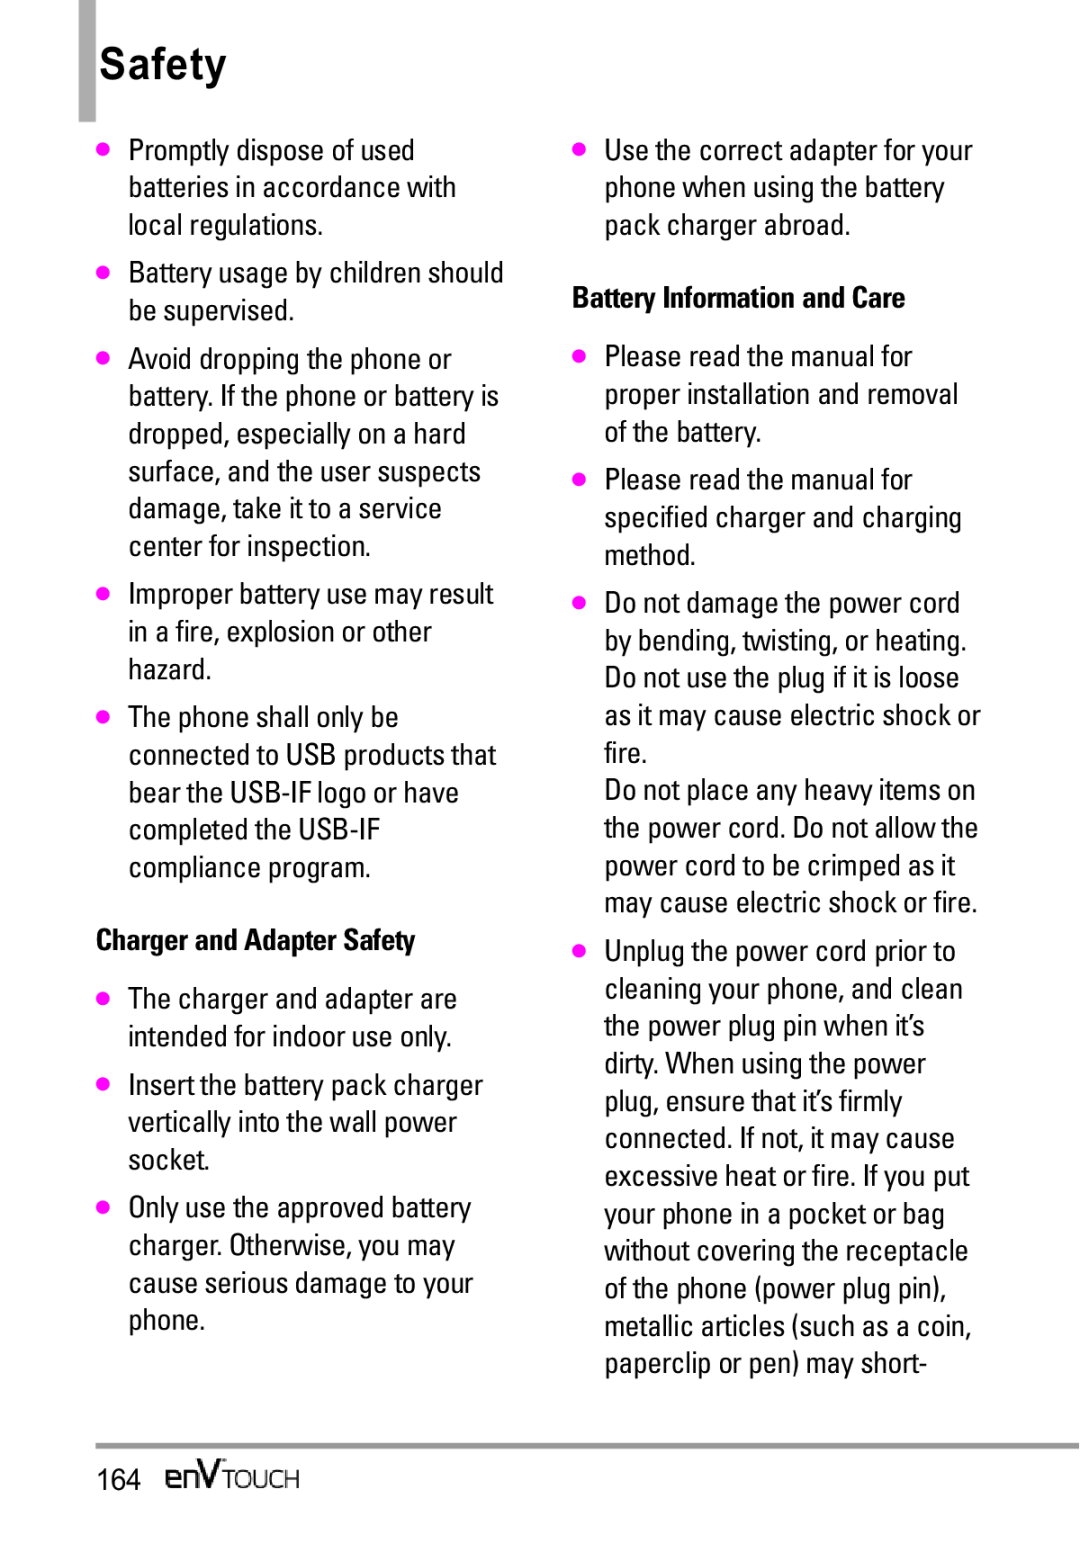 LG Electronics MMBB0332901 manual Charger and Adapter Safety, Battery Information and Care 